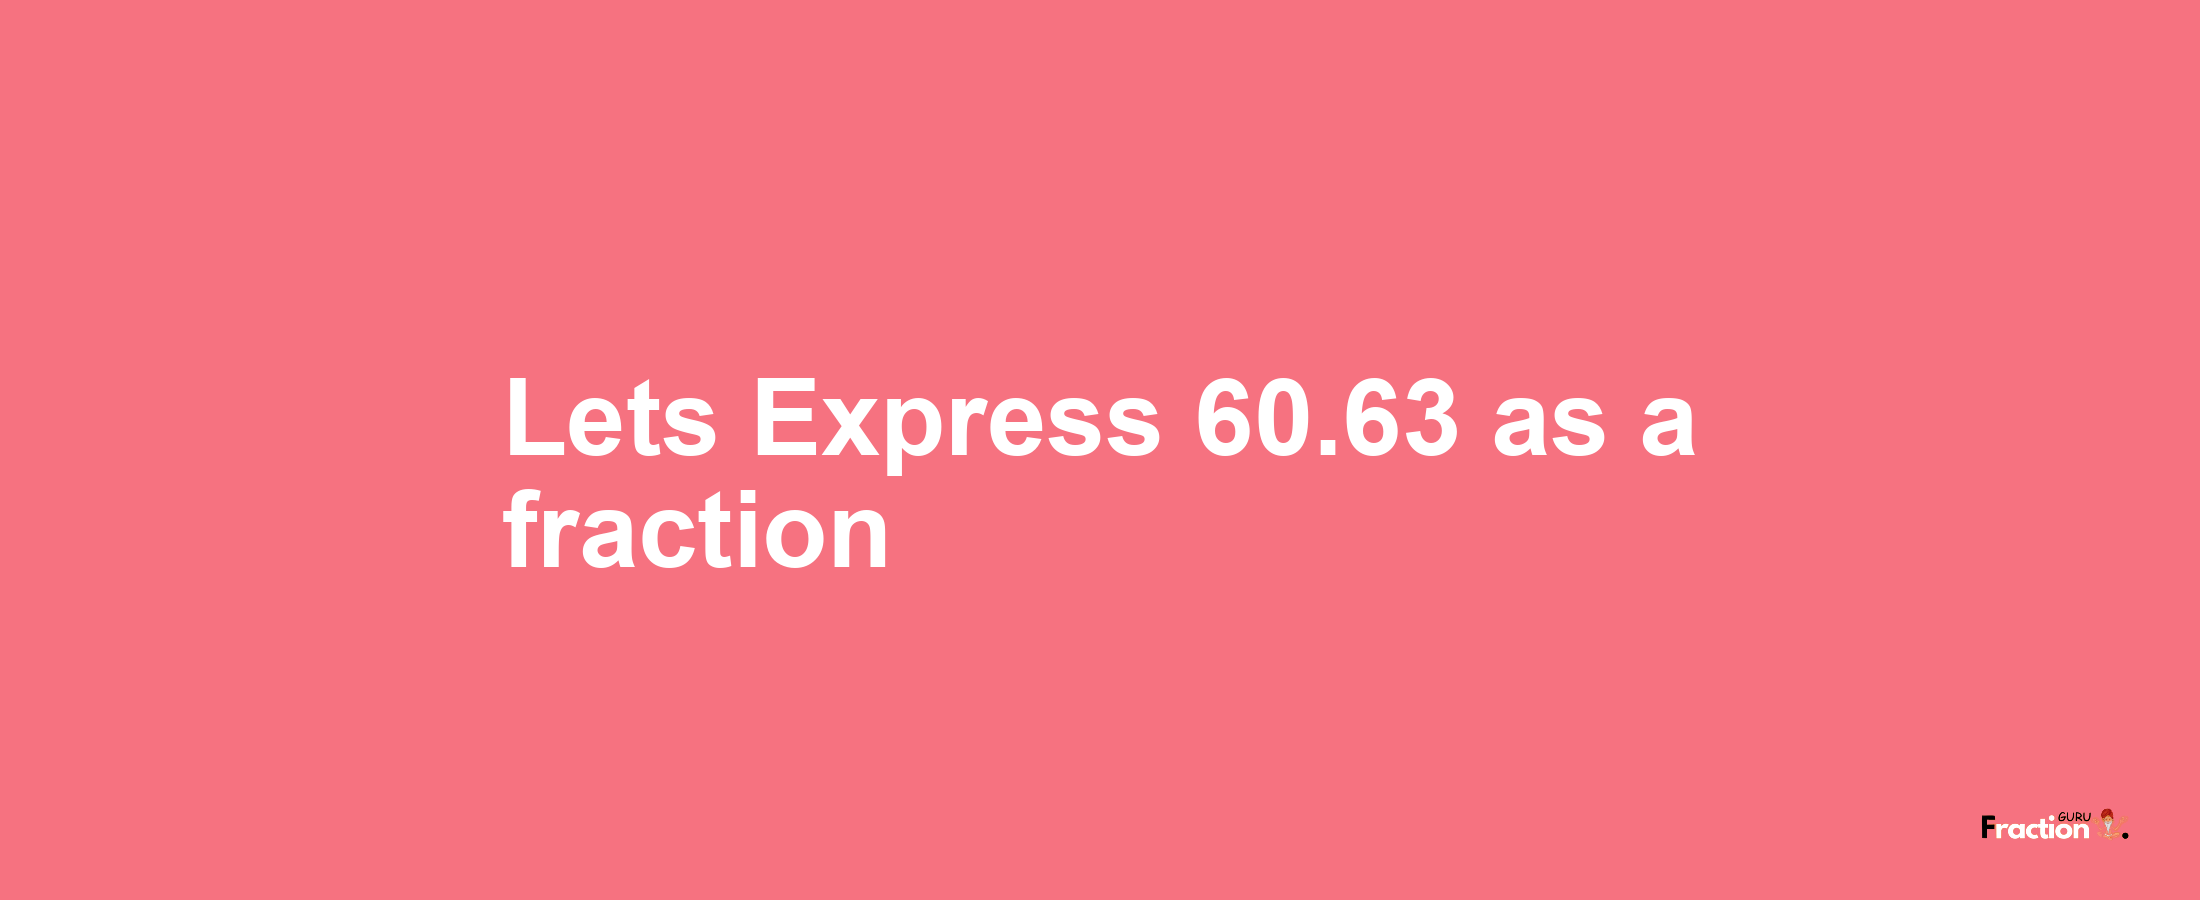 Lets Express 60.63 as afraction